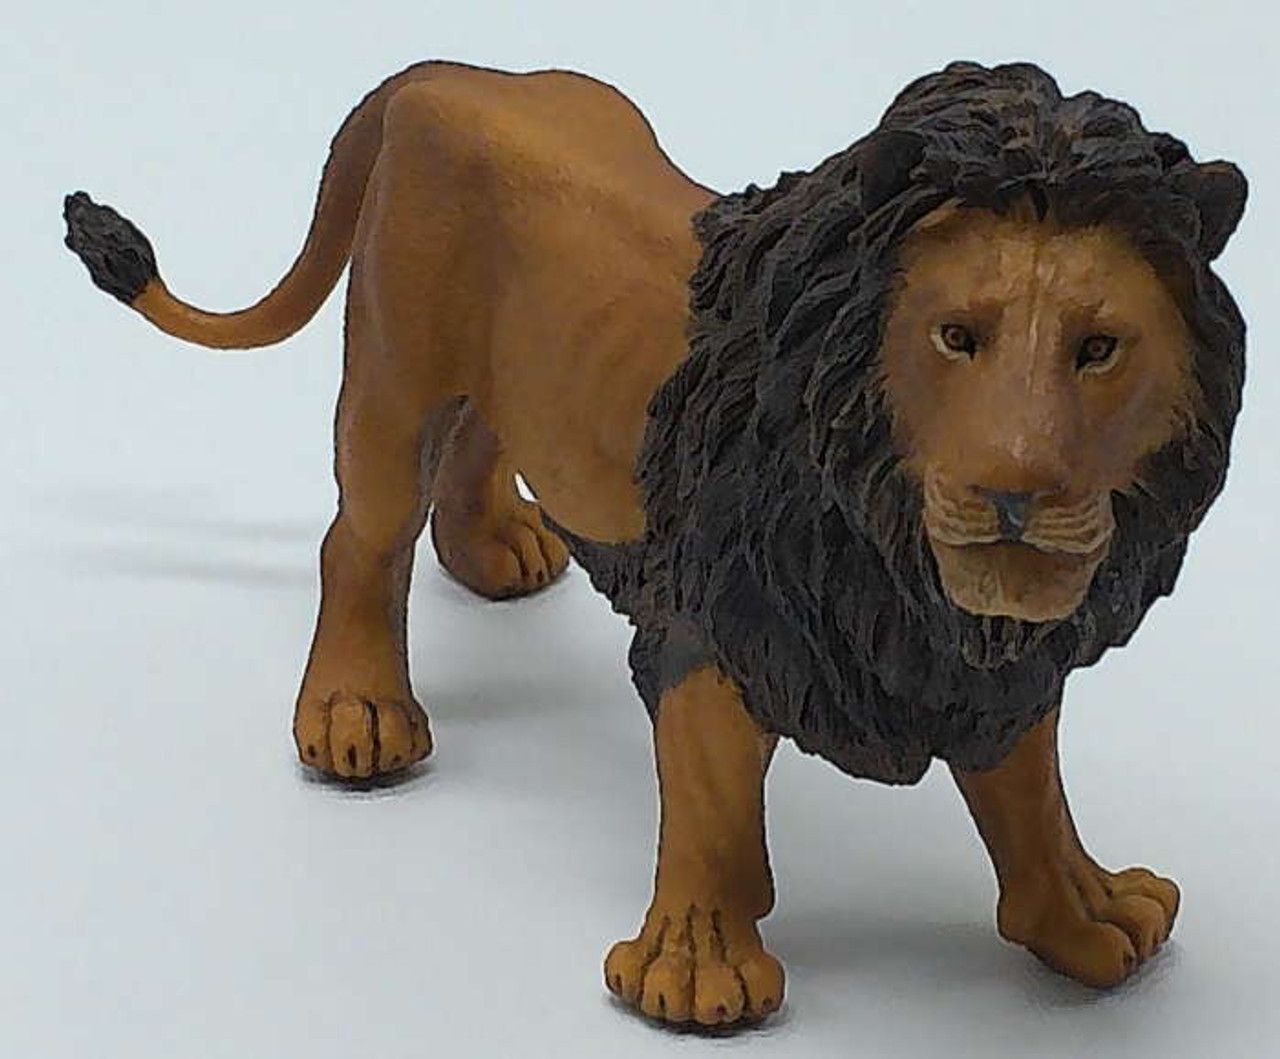 Papo Wild Animals - Lion #50040 - Regal King of the Jungle